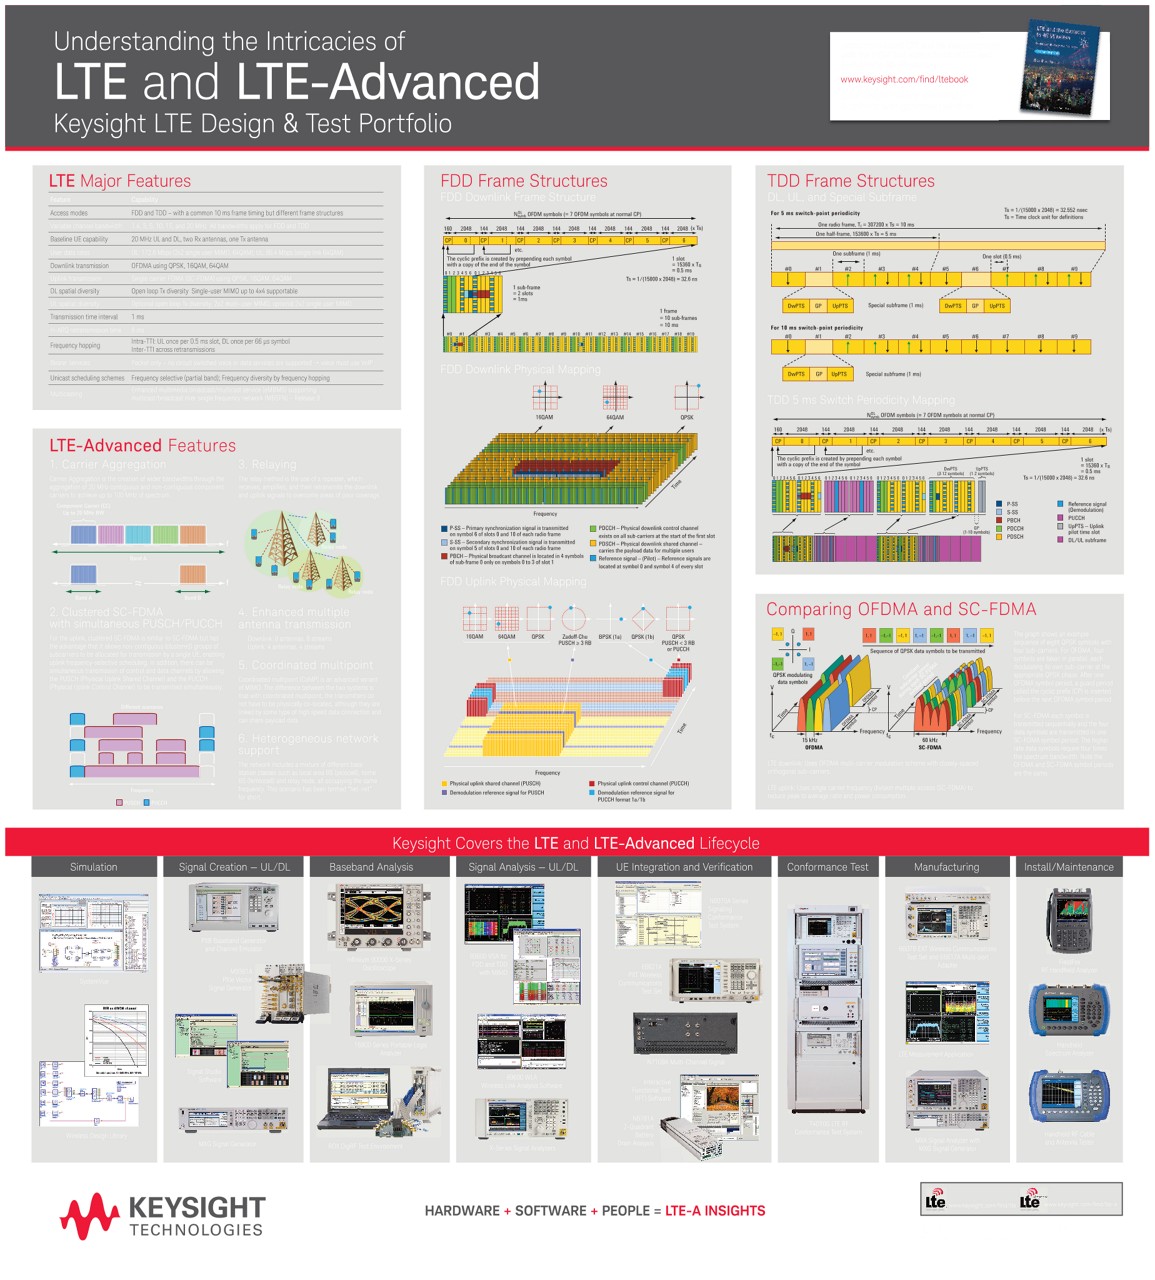 LTE and LTE-Advanced Intricacies